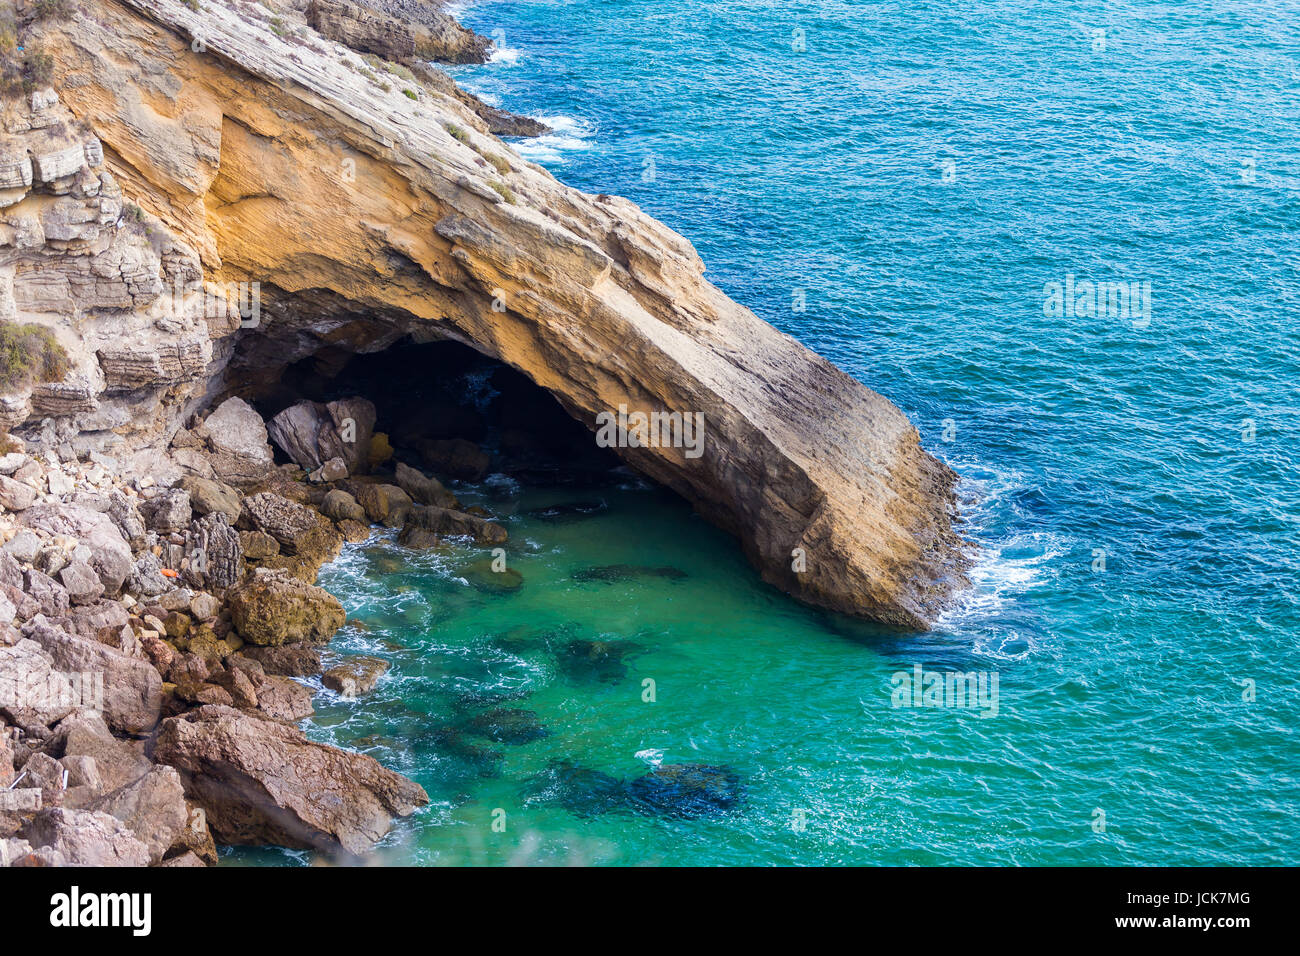 The monumental cliffs at coast near Sagres point in Algarve, Portugal Stock Photo